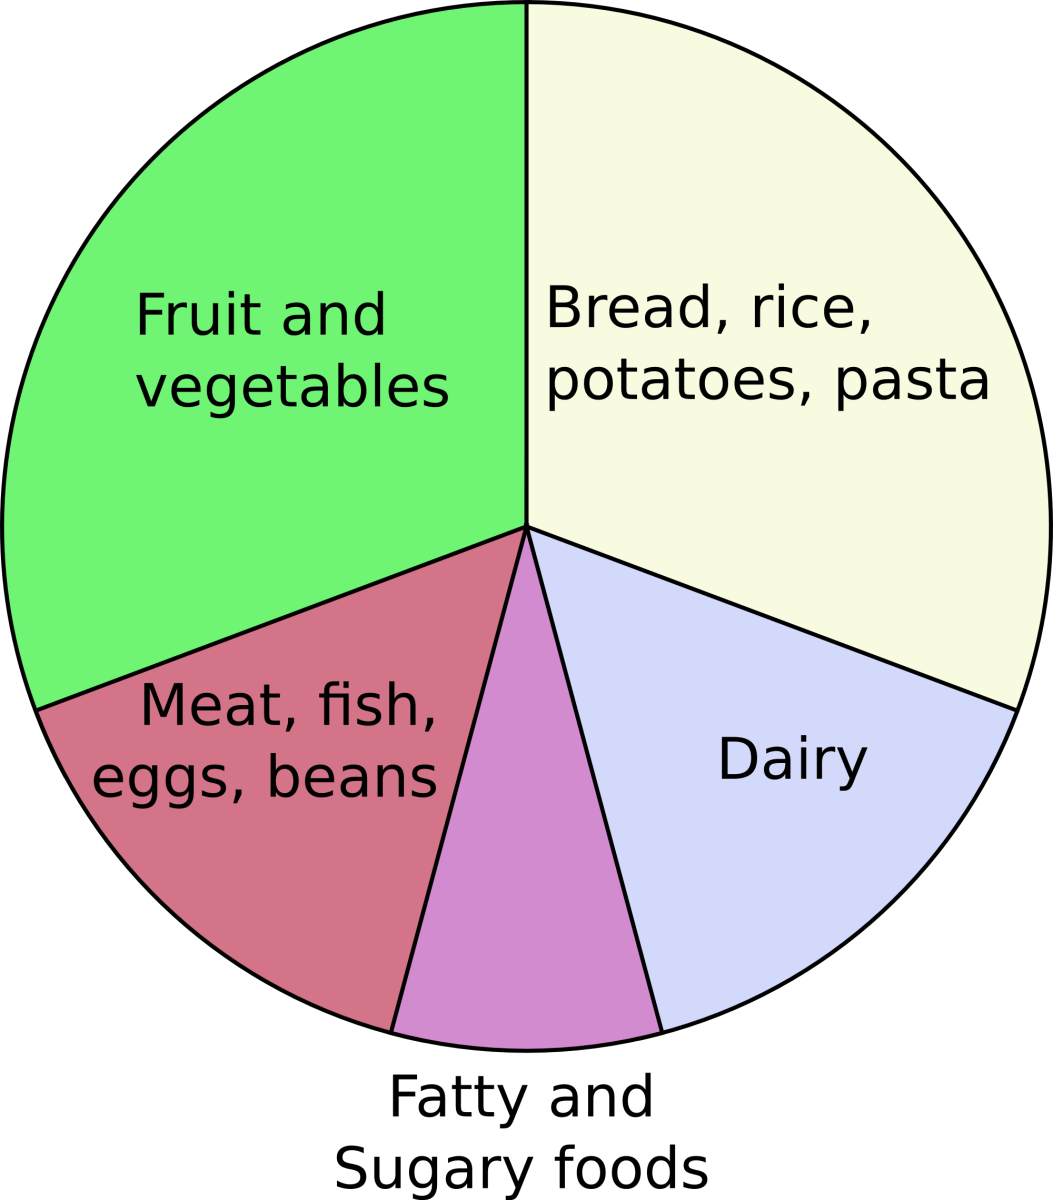 Food Sources of a Balanced Diet